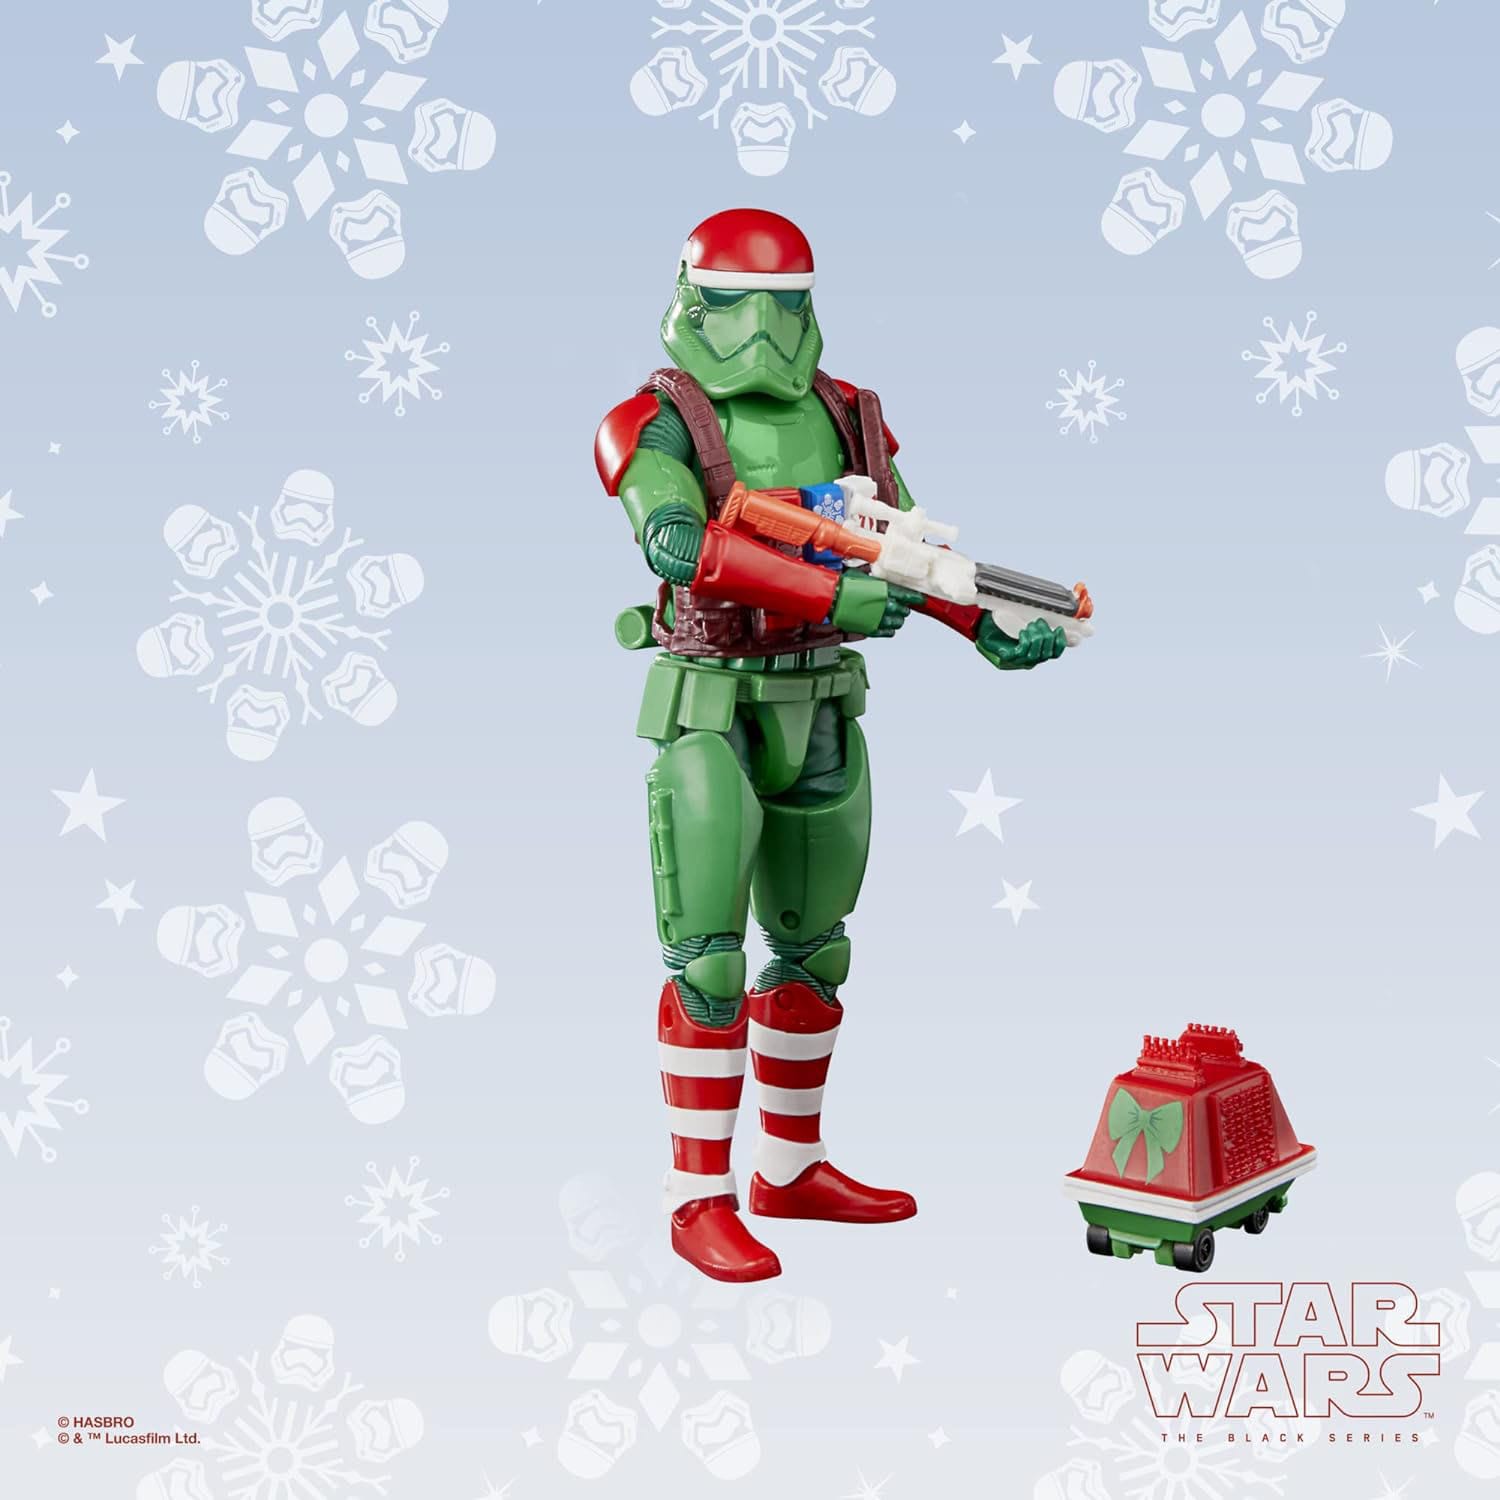 Star Wars Black Series Actionfigur 2021 First Order Stormtrooper Holiday 15 cm HASF5306 5010993954025